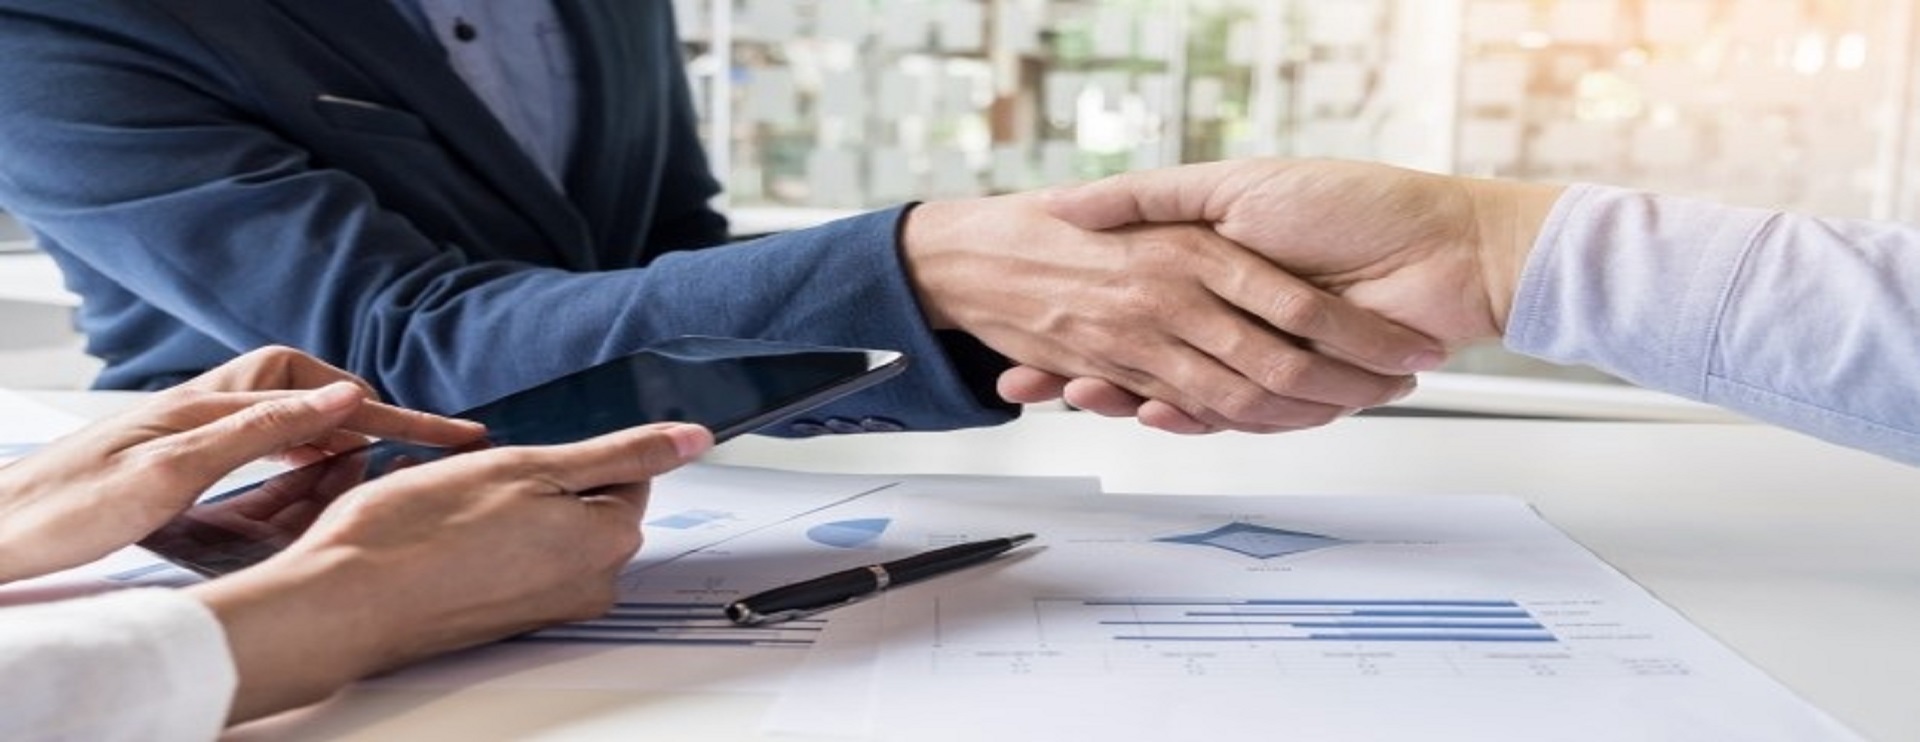 business-handshake-two-men-demonstrating-their-agreement-sign-agreement-contract-their-firms-companies-enterprises_1423-100